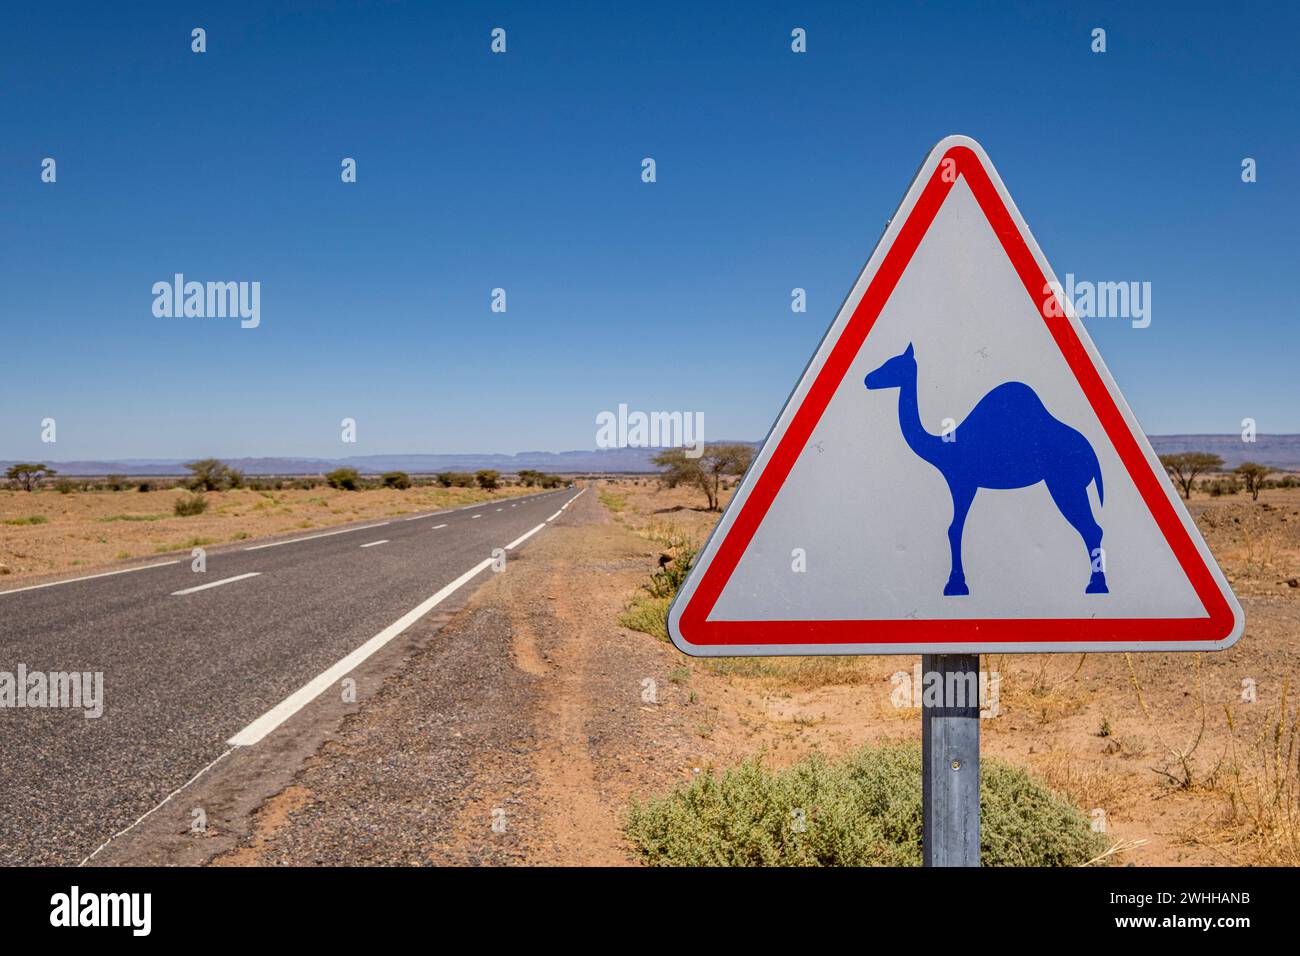 Notice of camels at large Stock Photo